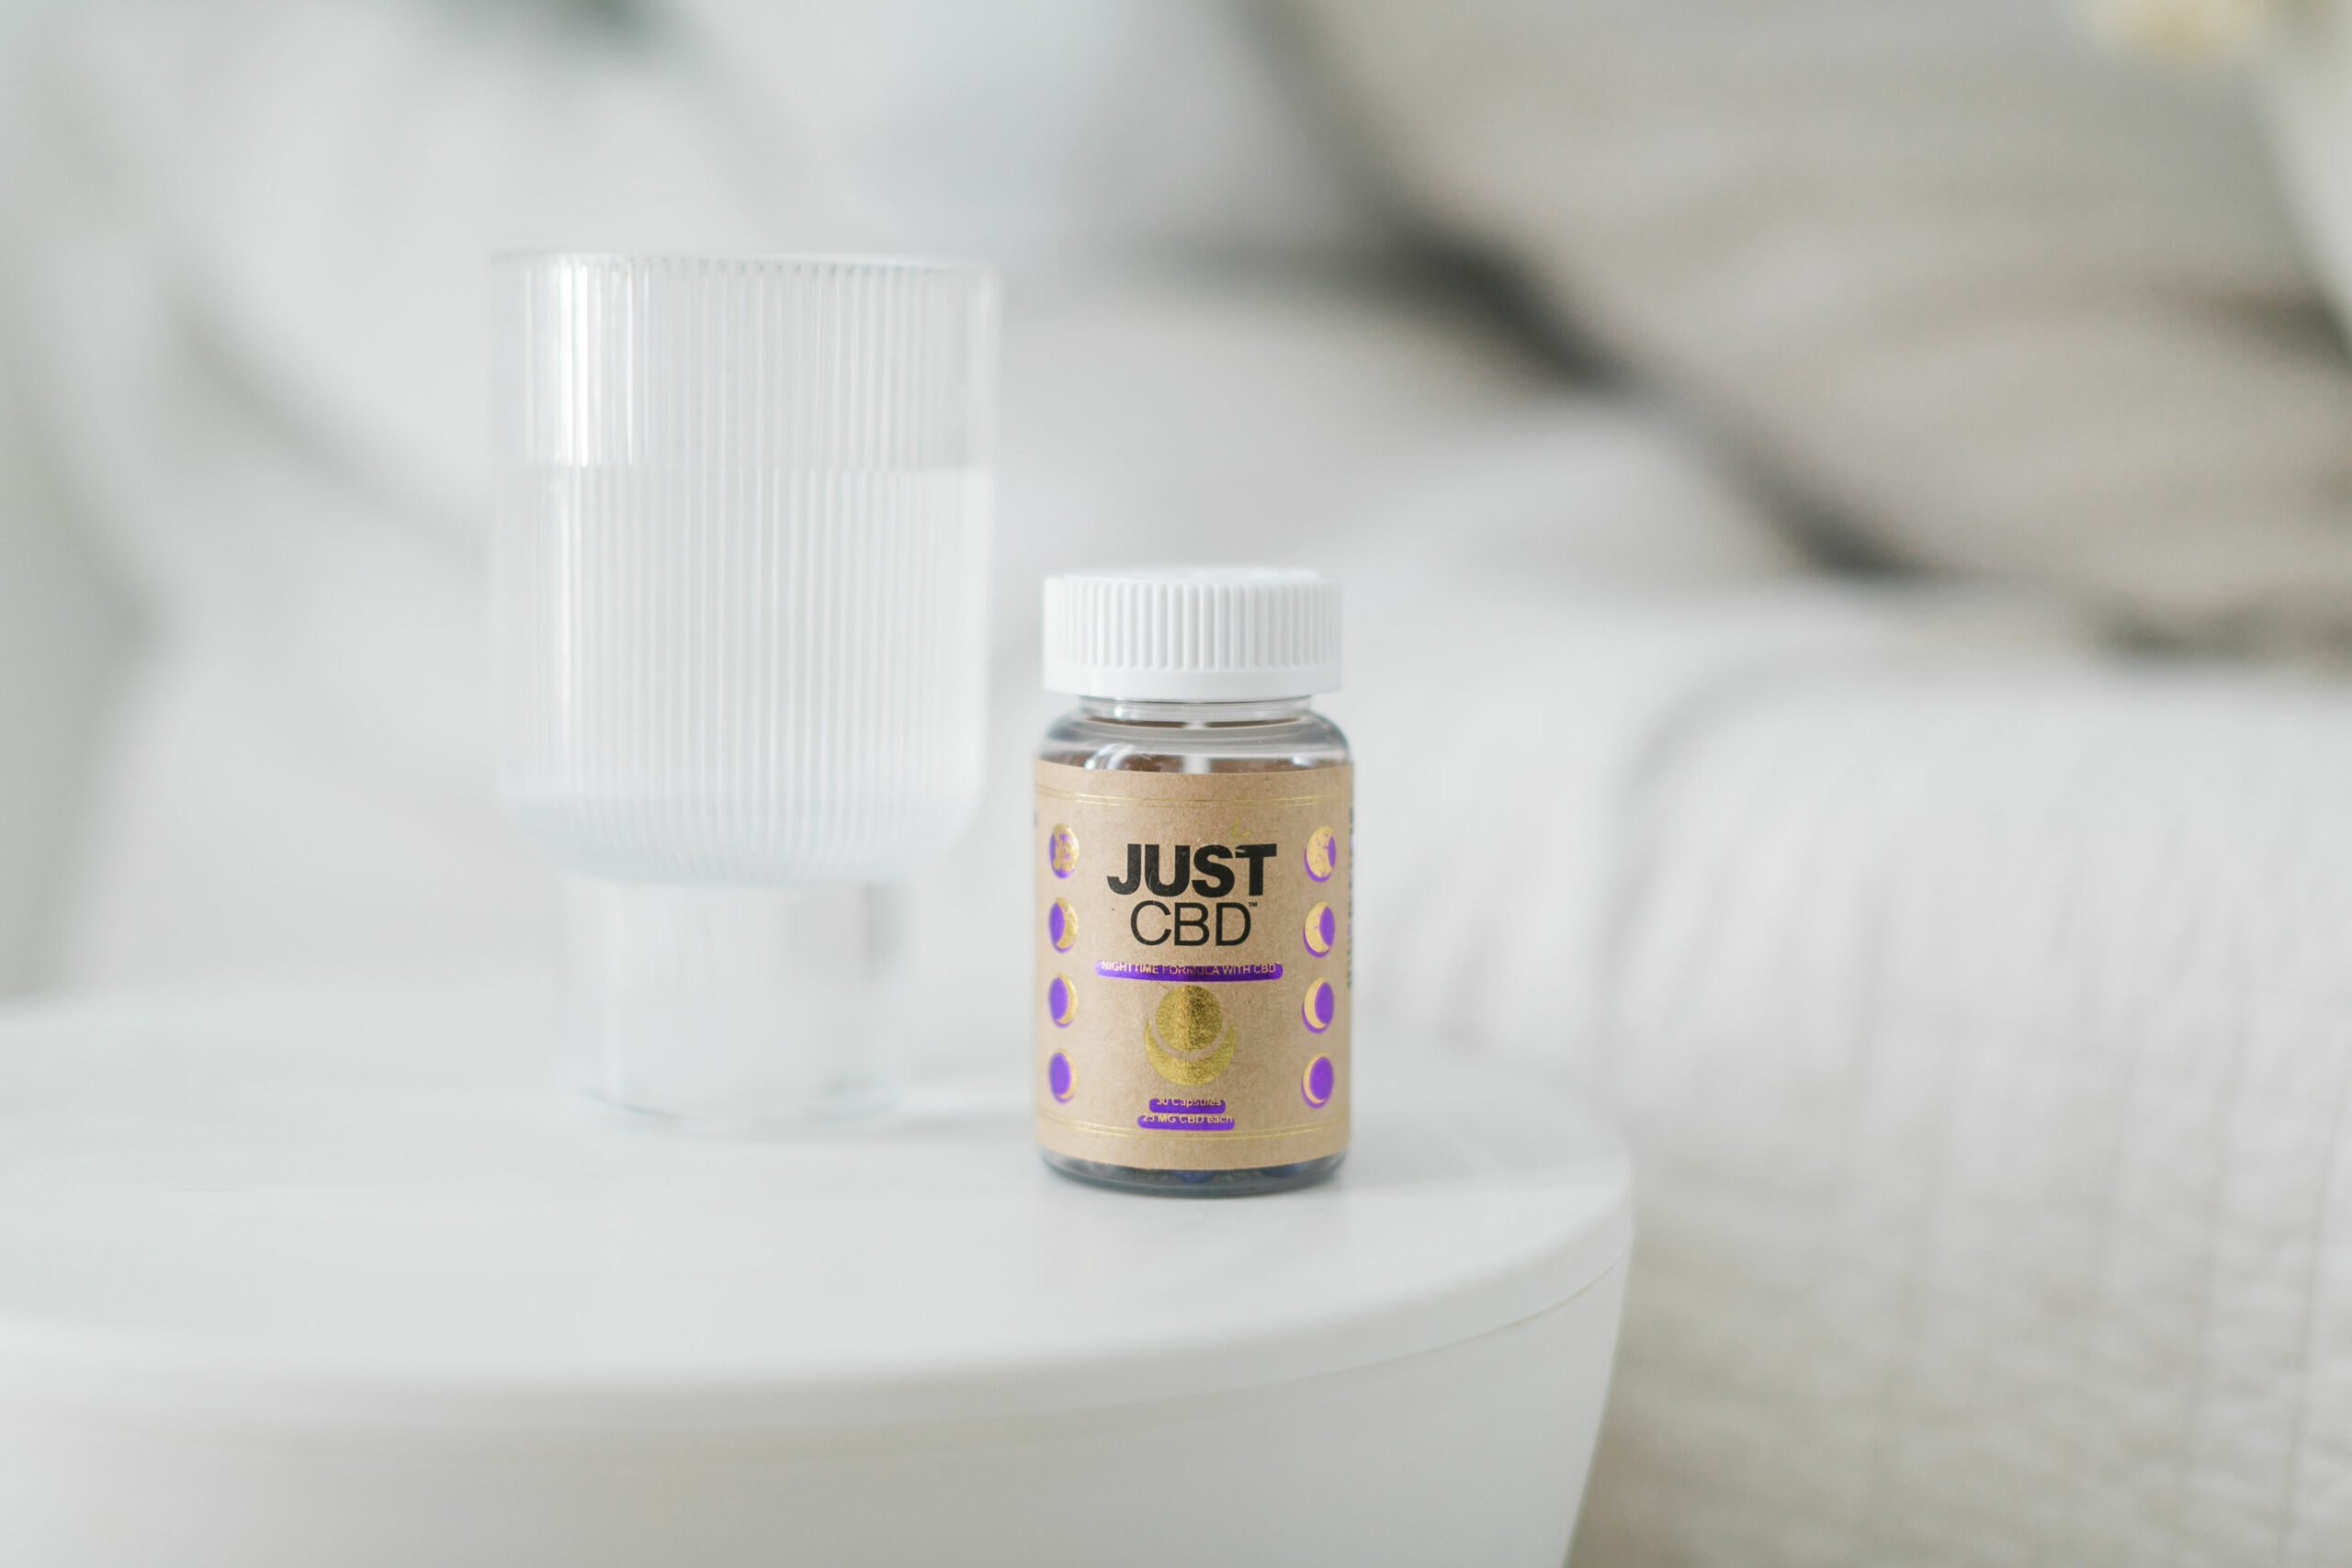 5 WAYS TO ADD CBD TOPICALS TO YOUR DAILY ROUTINE